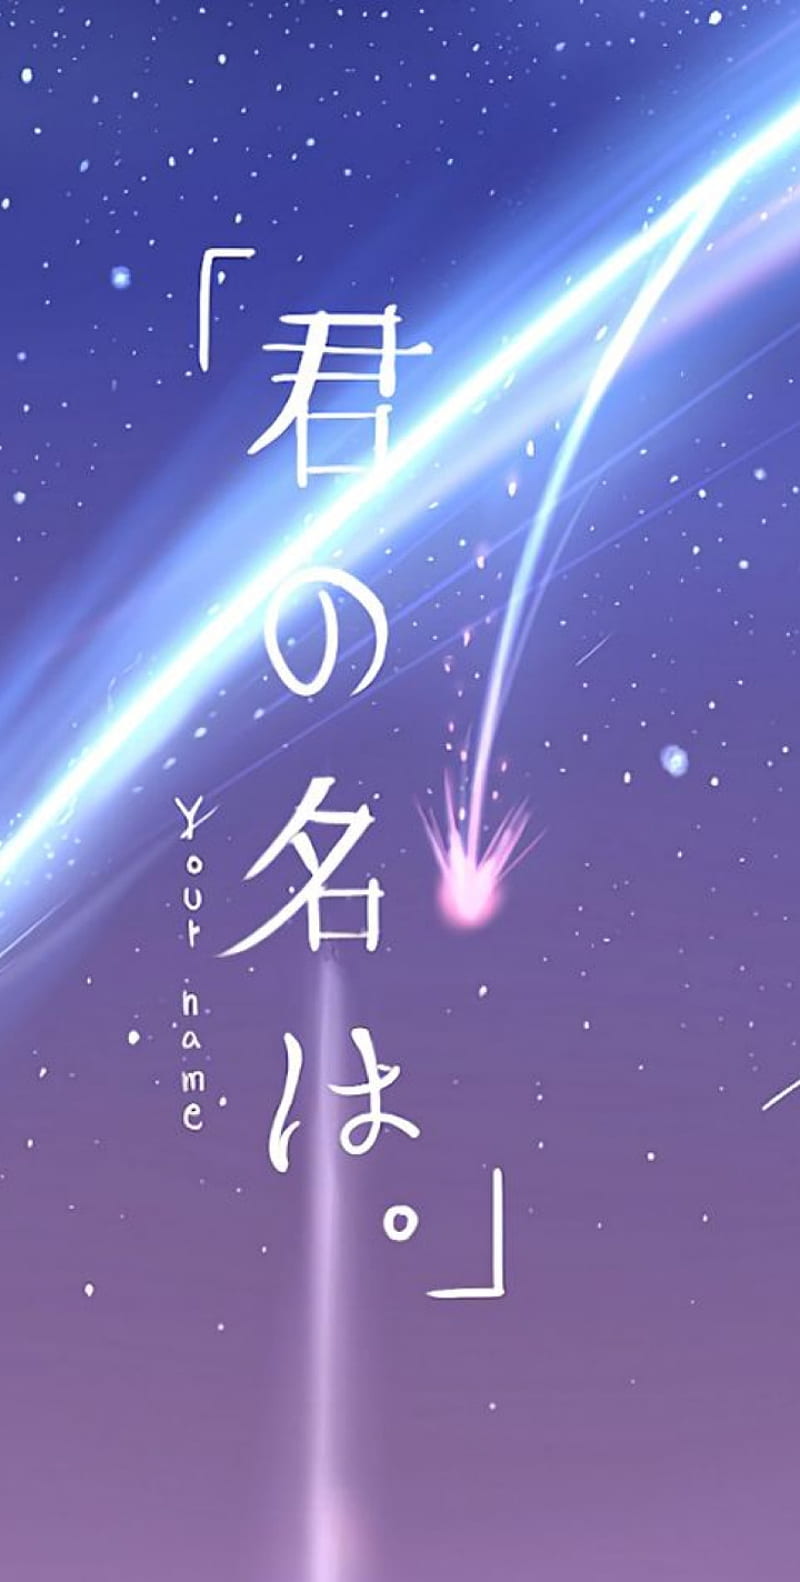 Your Name Galaxy Supreme Hd Mobile Wallpaper Peakpx